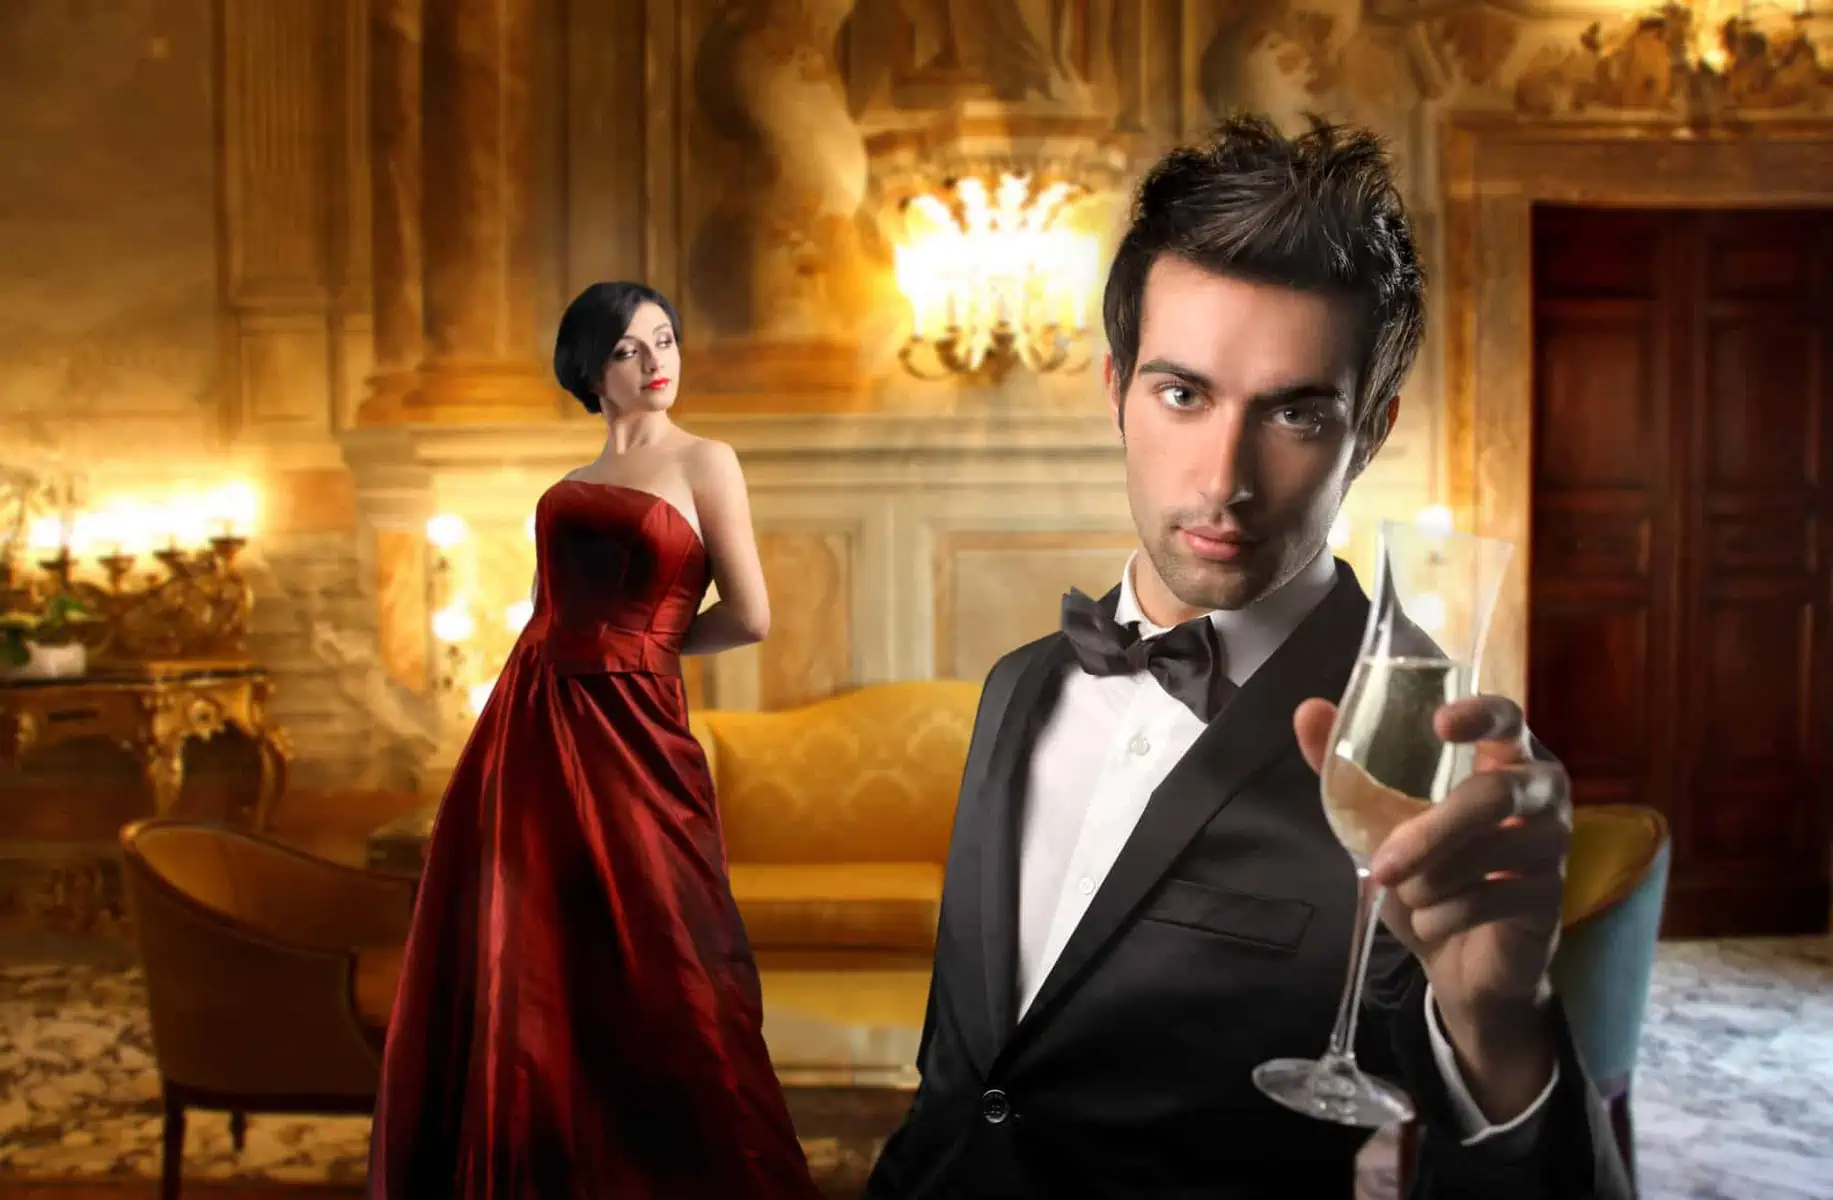 A man in a tuxedo holding a wine glass